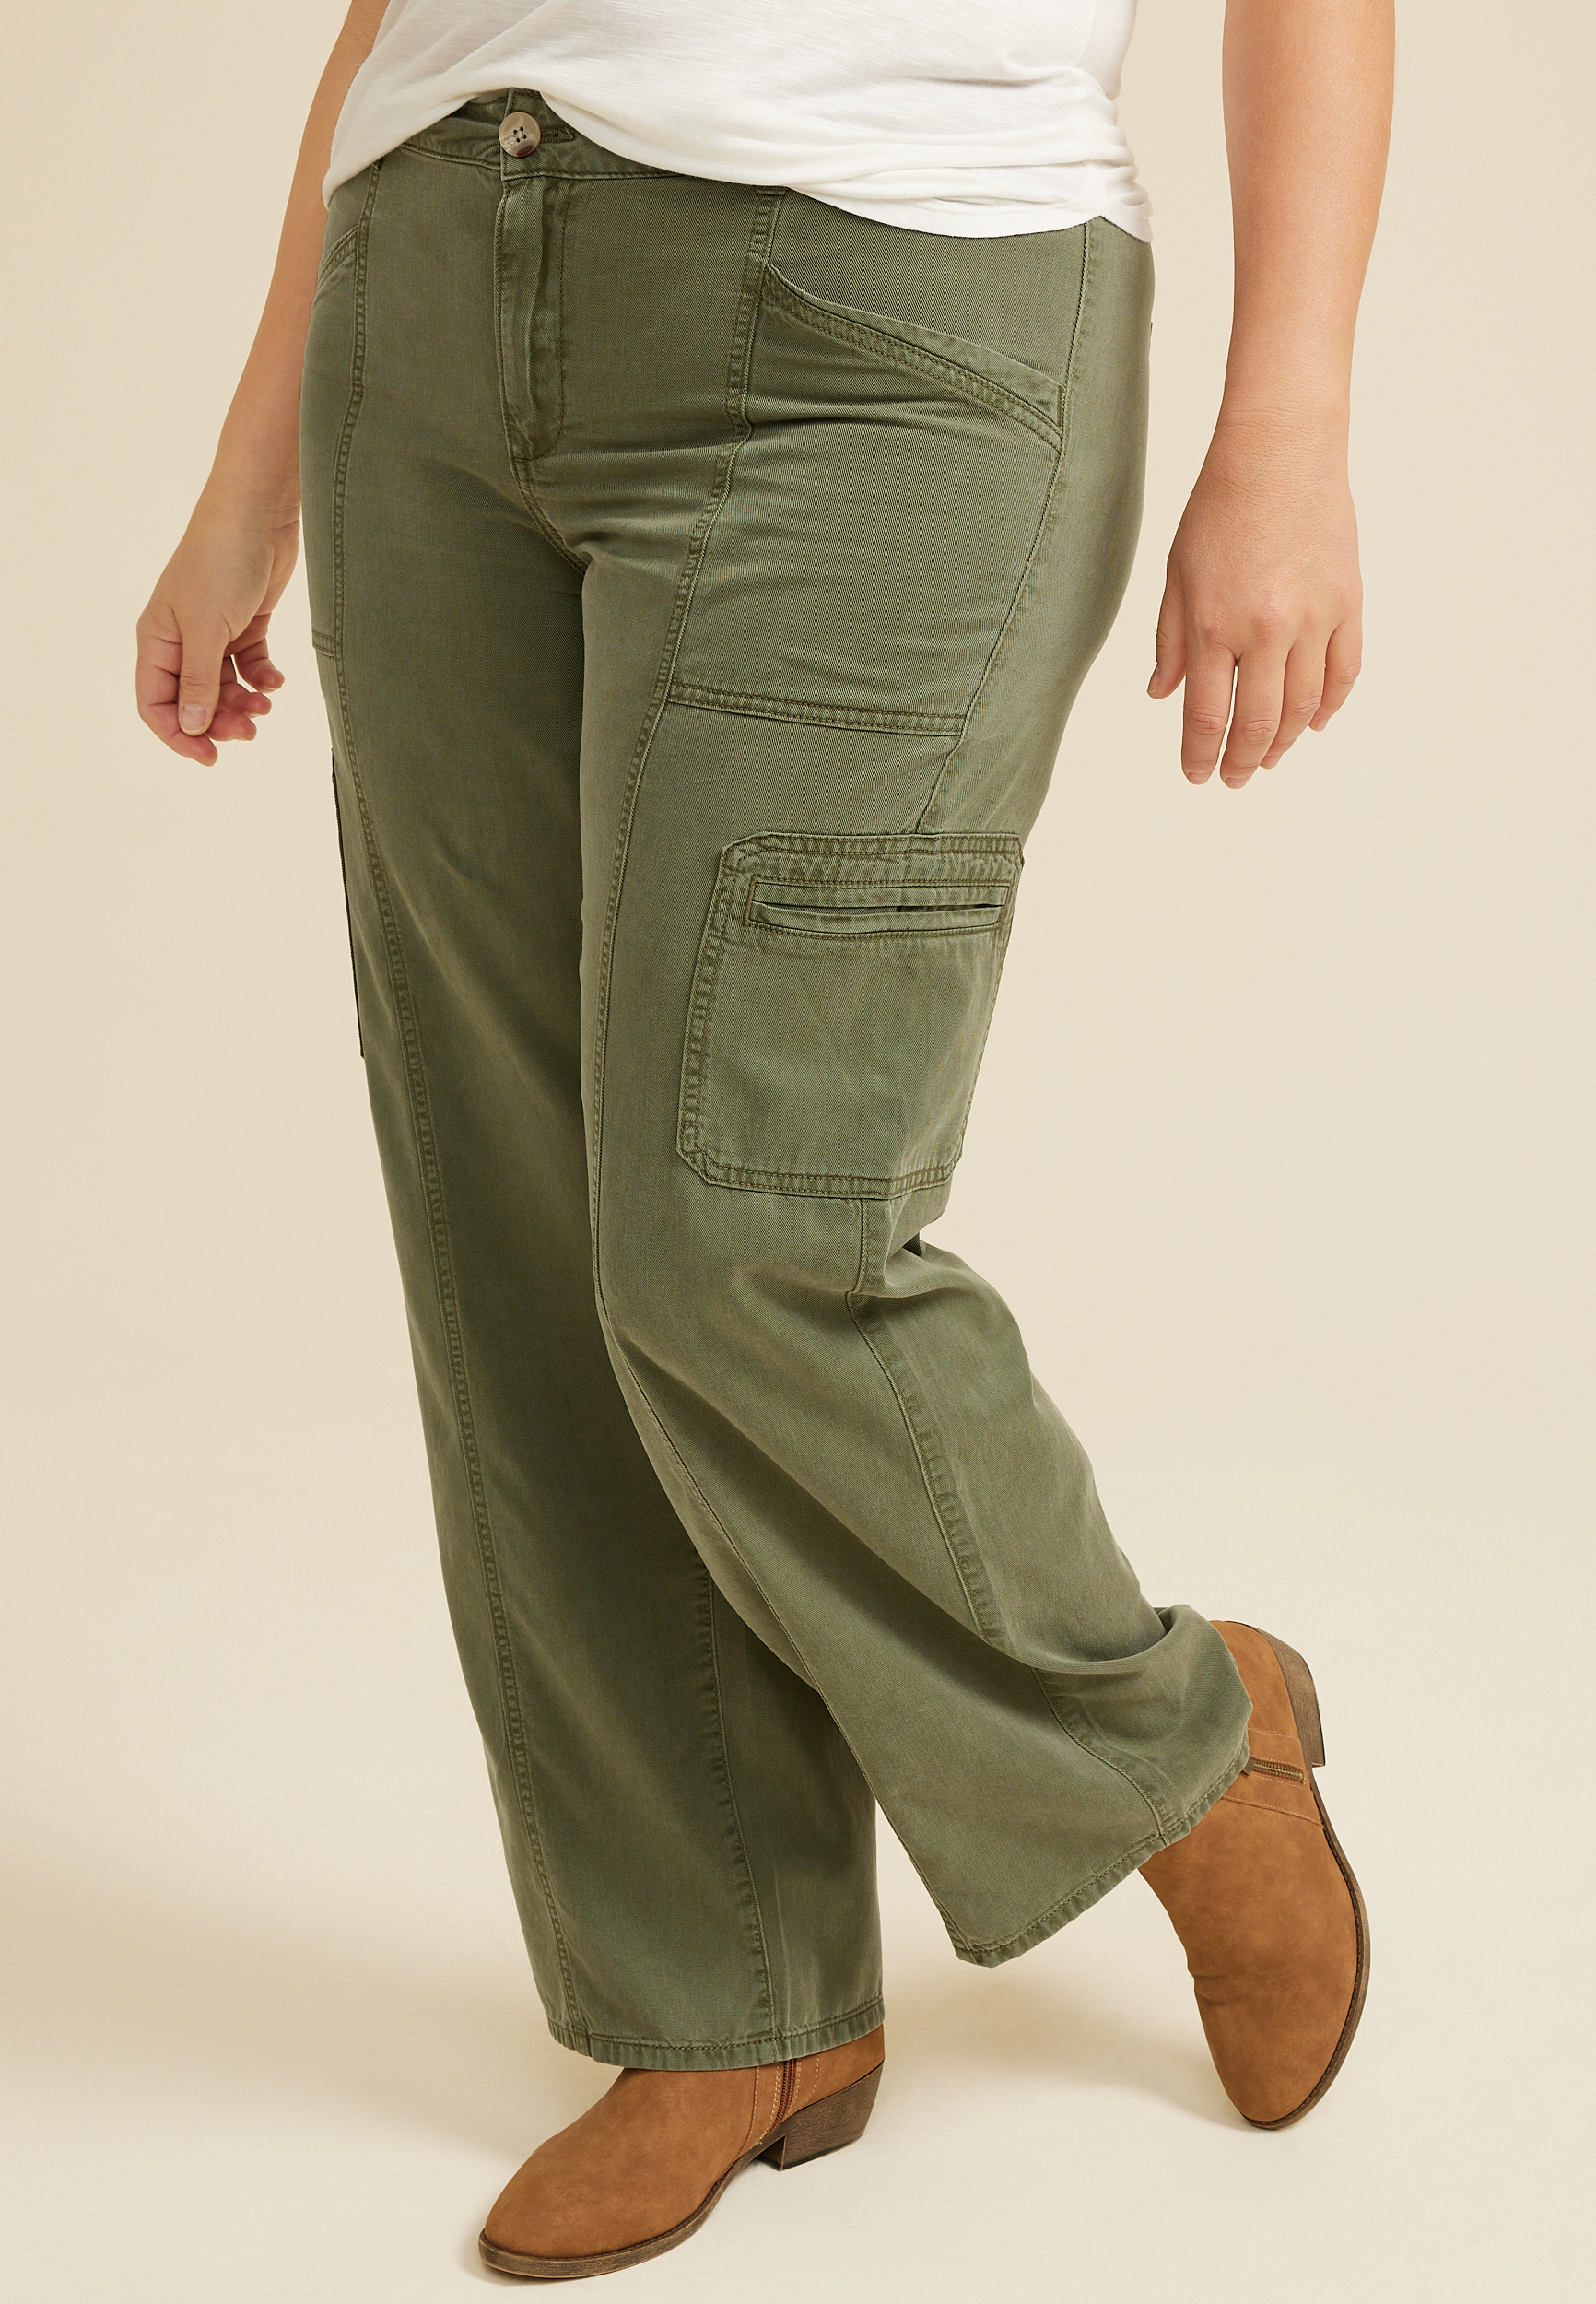 Womens Pants & Capris Plus Size Formal For Women Office Lady Style Work  Wear Straight Trousers Female Clothing Business Design Fashion From  Nvzhuangd, $25.69